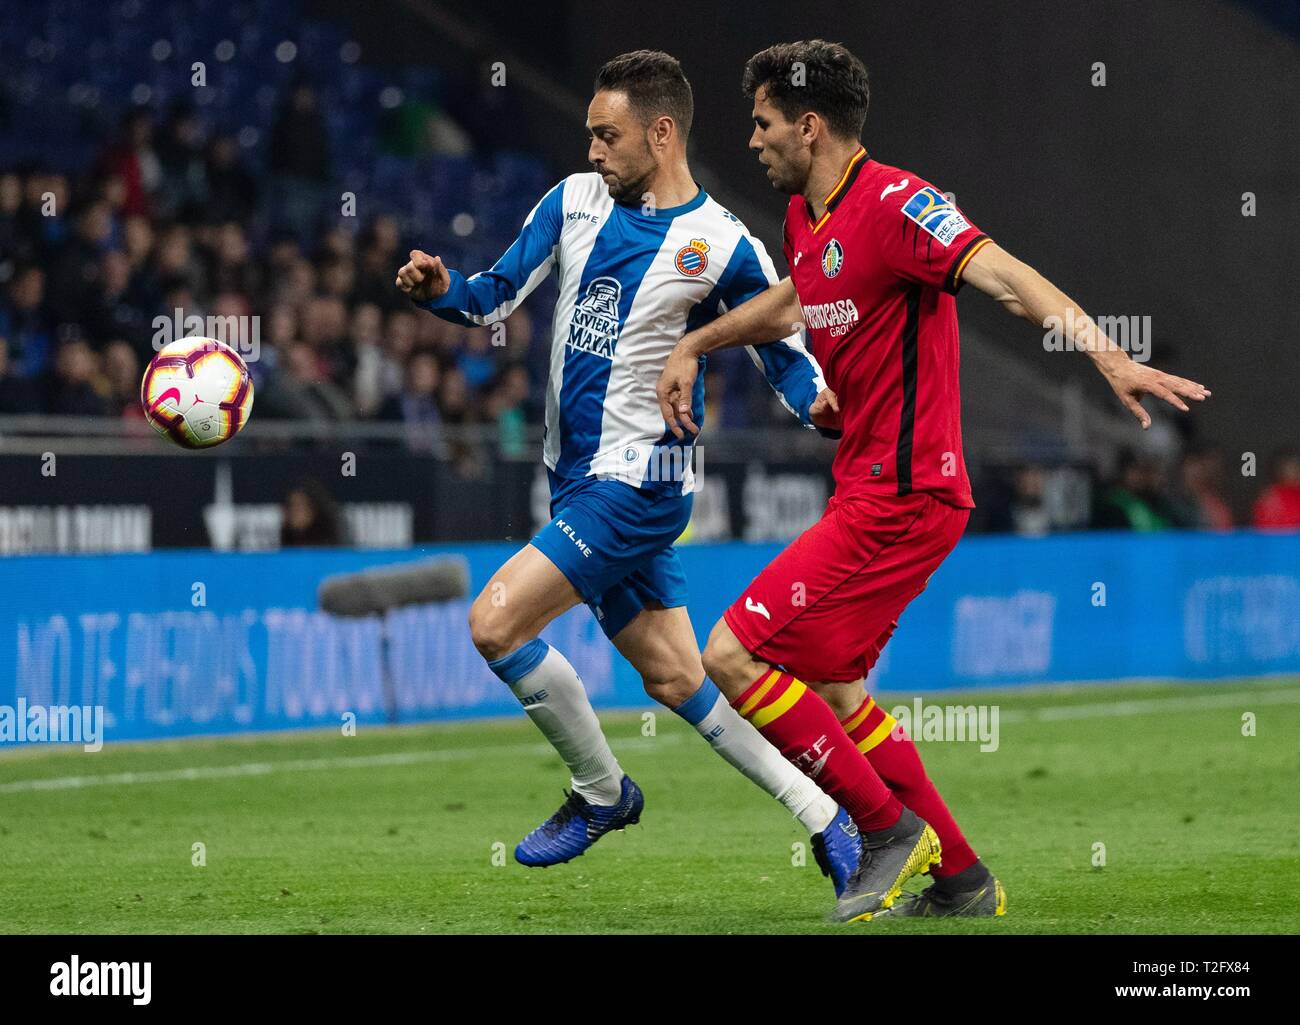 Barcelona, Spain. 2nd Apr, 2019. RCD Espanyol's Sergio Garcia (L) competes with Getafe's Leandro Cabrera during a Spanish league soccer match between RCD Espanyol and Getafe in Barcelona, Spain, on April 2, 2019. The match ended 1-1. Credit: Joan Gosa/Xinhua/Alamy Live News Stock Photo